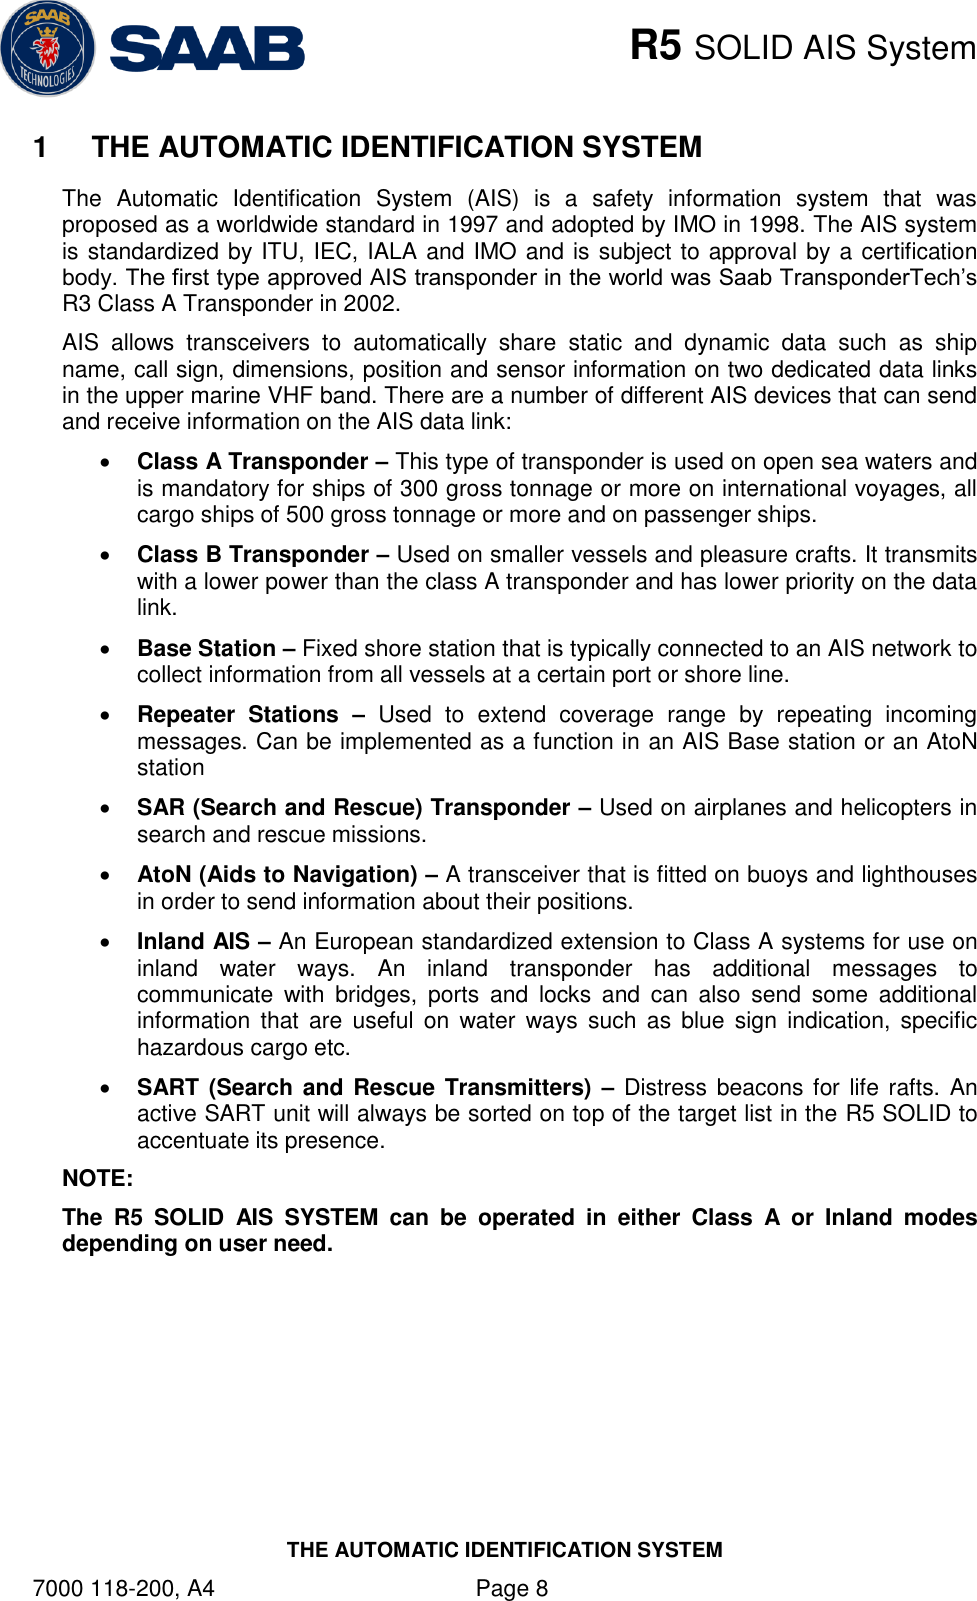    R5 SOLID AIS System THE AUTOMATIC IDENTIFICATION SYSTEM 7000 118-200, A4    Page 8 1  THE AUTOMATIC IDENTIFICATION SYSTEM The  Automatic  Identification  System  (AIS)  is  a  safety  information  system  that  was proposed as a worldwide standard in 1997 and adopted by IMO in 1998. The AIS system is standardized by ITU, IEC, IALA and IMO and is subject to approval by a certification body. The first type approved AIS transponder in the world was Saab TransponderTech‟s R3 Class A Transponder in 2002.  AIS  allows  transceivers  to  automatically  share  static  and  dynamic  data  such  as  ship name, call sign, dimensions, position and sensor information on two dedicated data links in the upper marine VHF band. There are a number of different AIS devices that can send and receive information on the AIS data link:  Class A Transponder – This type of transponder is used on open sea waters and is mandatory for ships of 300 gross tonnage or more on international voyages, all cargo ships of 500 gross tonnage or more and on passenger ships.   Class B Transponder – Used on smaller vessels and pleasure crafts. It transmits with a lower power than the class A transponder and has lower priority on the data link.   Base Station – Fixed shore station that is typically connected to an AIS network to collect information from all vessels at a certain port or shore line.   Repeater  Stations  – Used  to  extend  coverage  range  by  repeating  incoming messages. Can be implemented as a function in an AIS Base station or an AtoN station  SAR (Search and Rescue) Transponder – Used on airplanes and helicopters in search and rescue missions.   AtoN (Aids to Navigation) – A transceiver that is fitted on buoys and lighthouses in order to send information about their positions.   Inland AIS – An European standardized extension to Class A systems for use on inland  water  ways.  An  inland  transponder  has  additional  messages  to communicate  with  bridges,  ports  and  locks  and  can  also  send  some  additional information that are  useful on  water  ways such  as  blue  sign  indication,  specific hazardous cargo etc.   SART (Search and Rescue Transmitters) – Distress  beacons for life rafts. An active SART unit will always be sorted on top of the target list in the R5 SOLID to accentuate its presence.   NOTE: The  R5  SOLID  AIS  SYSTEM  can  be  operated  in  either  Class  A  or  Inland  modes depending on user need.   